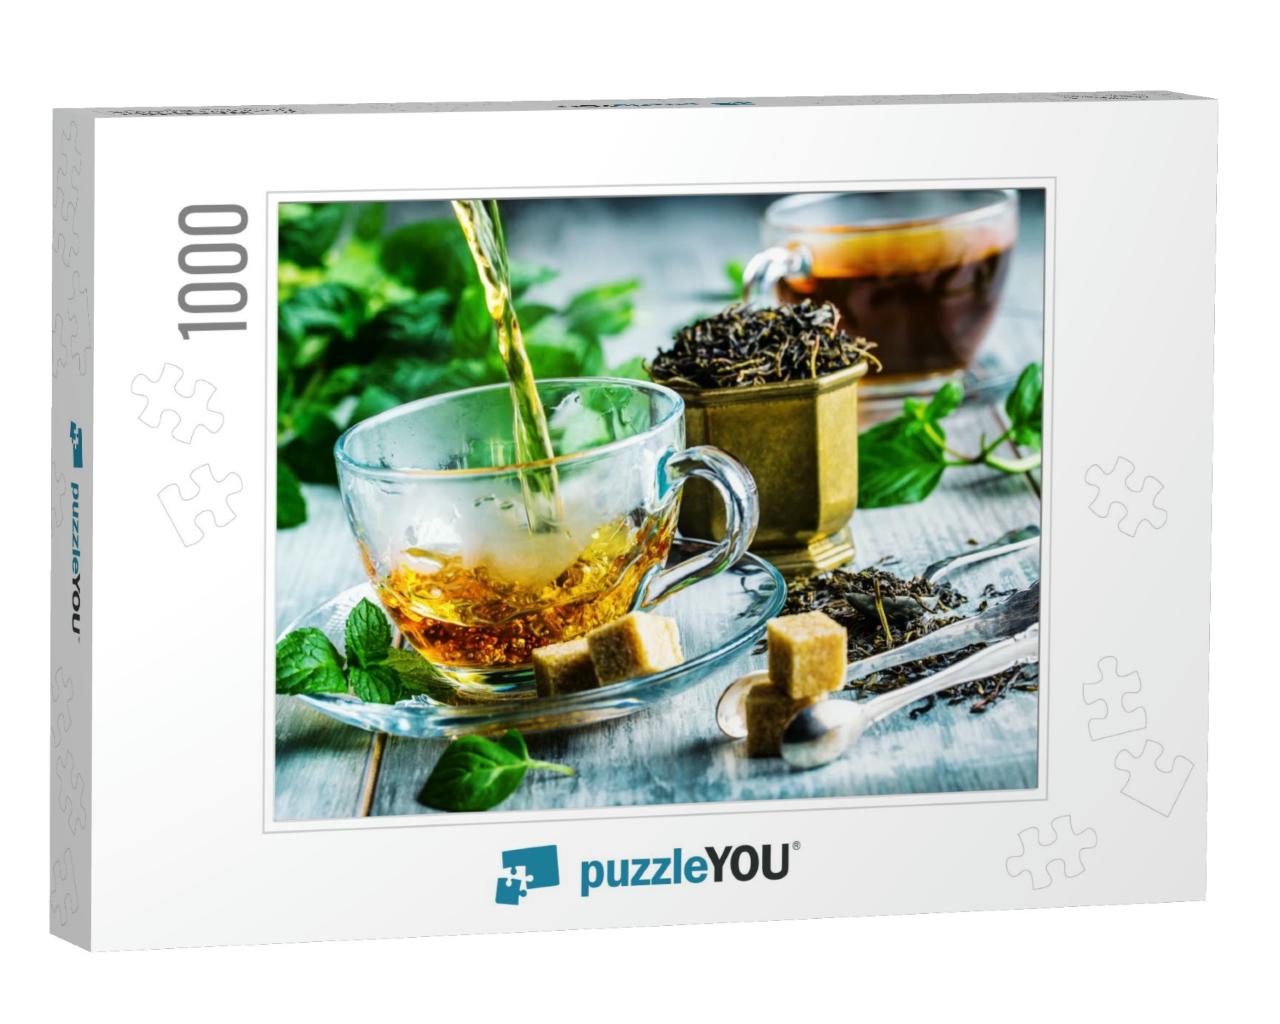 Cup of Hot Tea Cane Sugar Dry Tea Leaves & Mint Herb... Jigsaw Puzzle with 1000 pieces